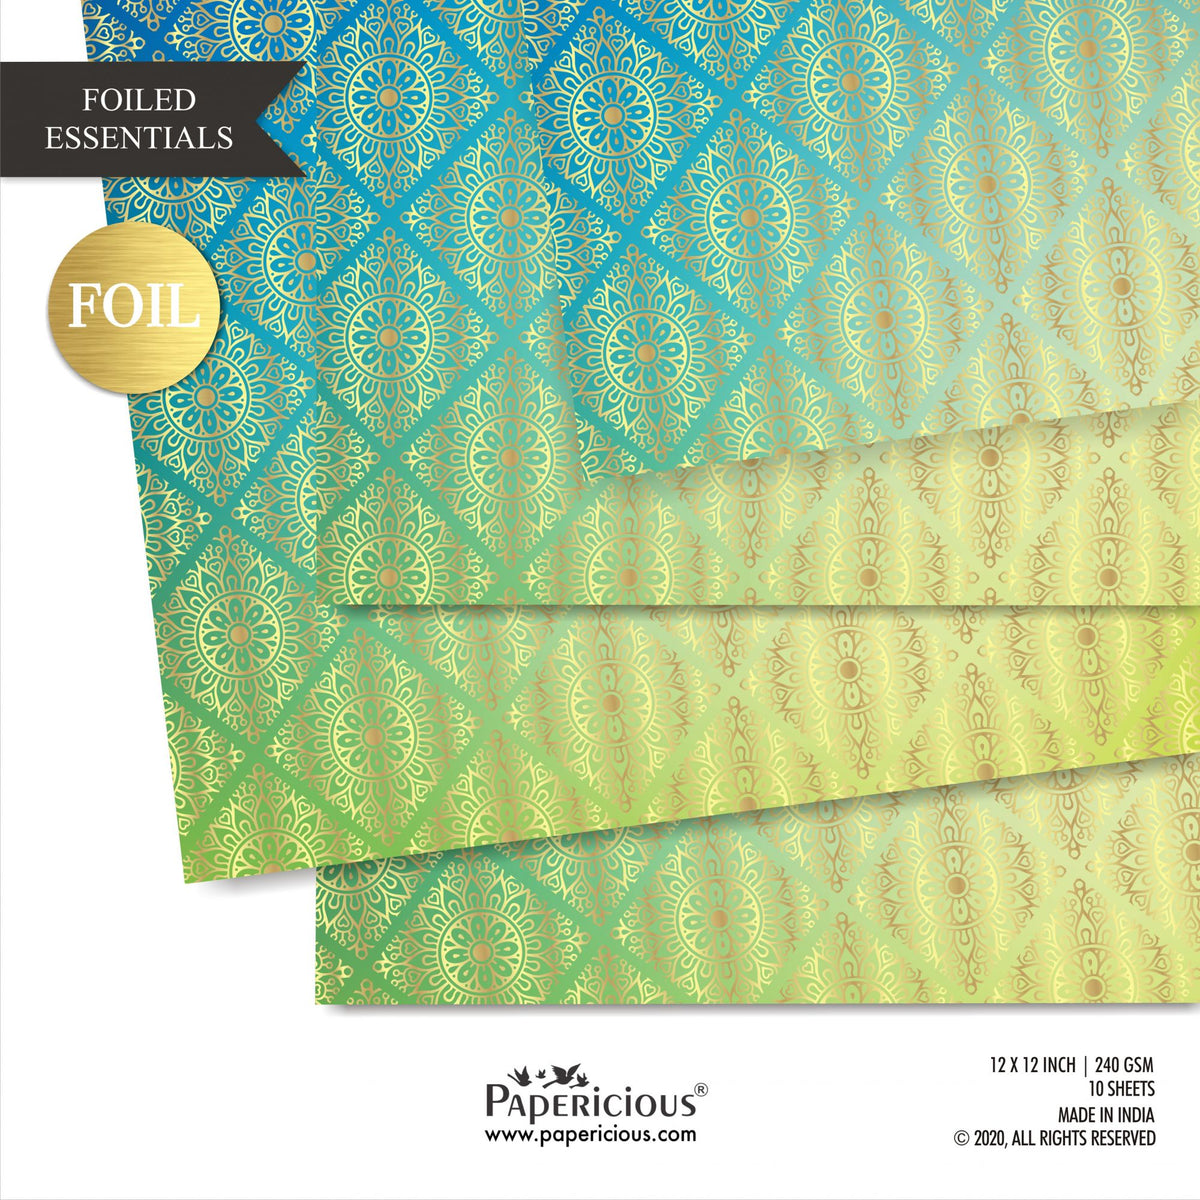 Papericious - Golden Foiled Pattern Scrapbook Papers 12x12 inch / 10 sheets / #12517